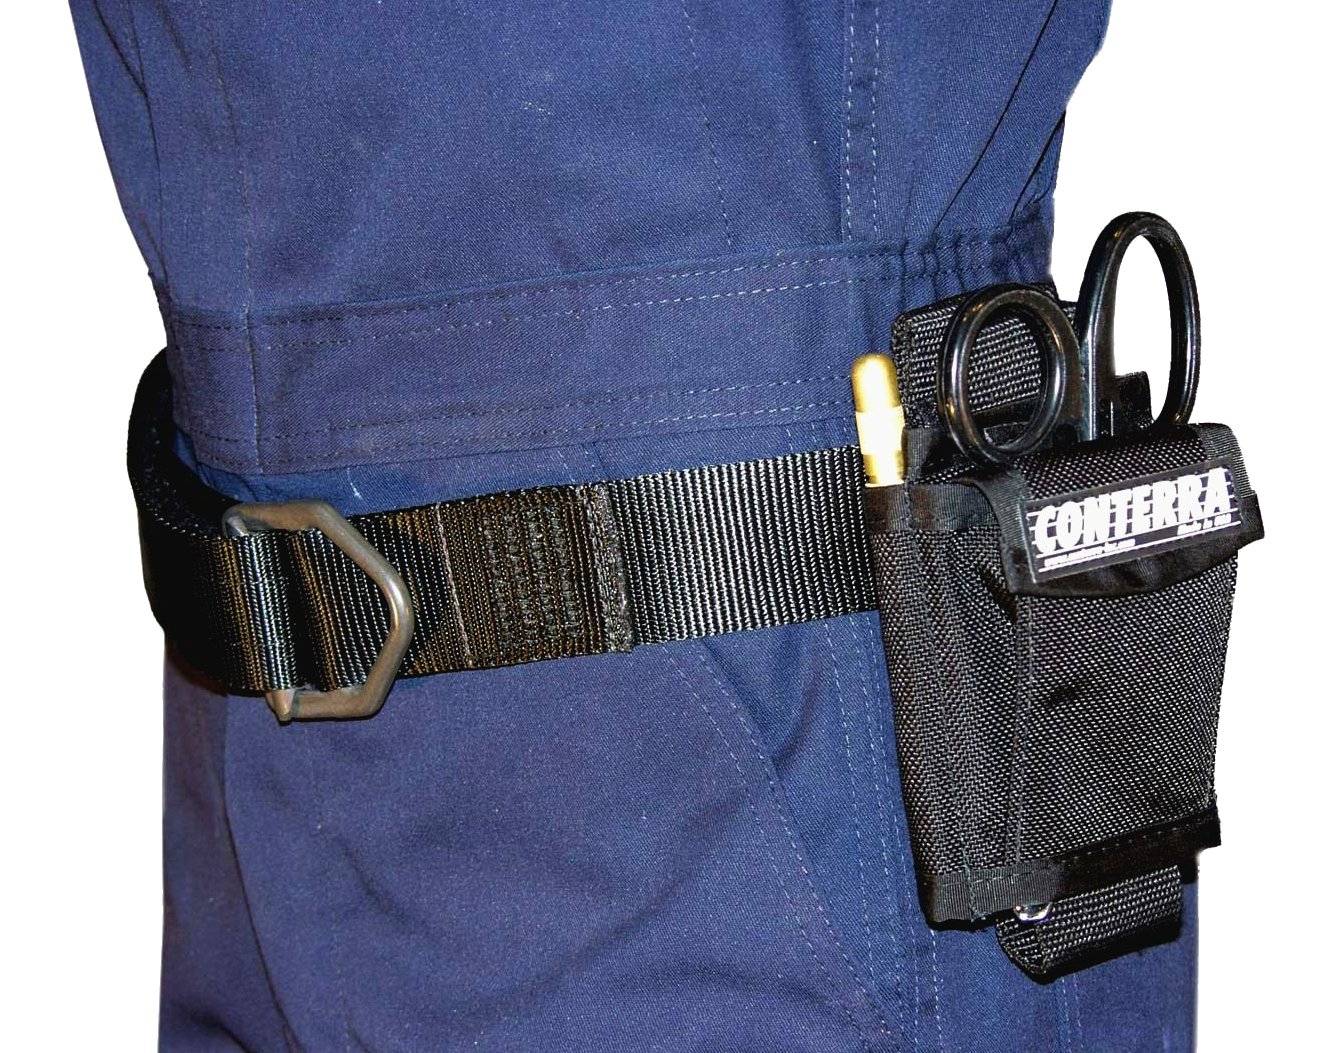 Traumpa Pro attached to a belt